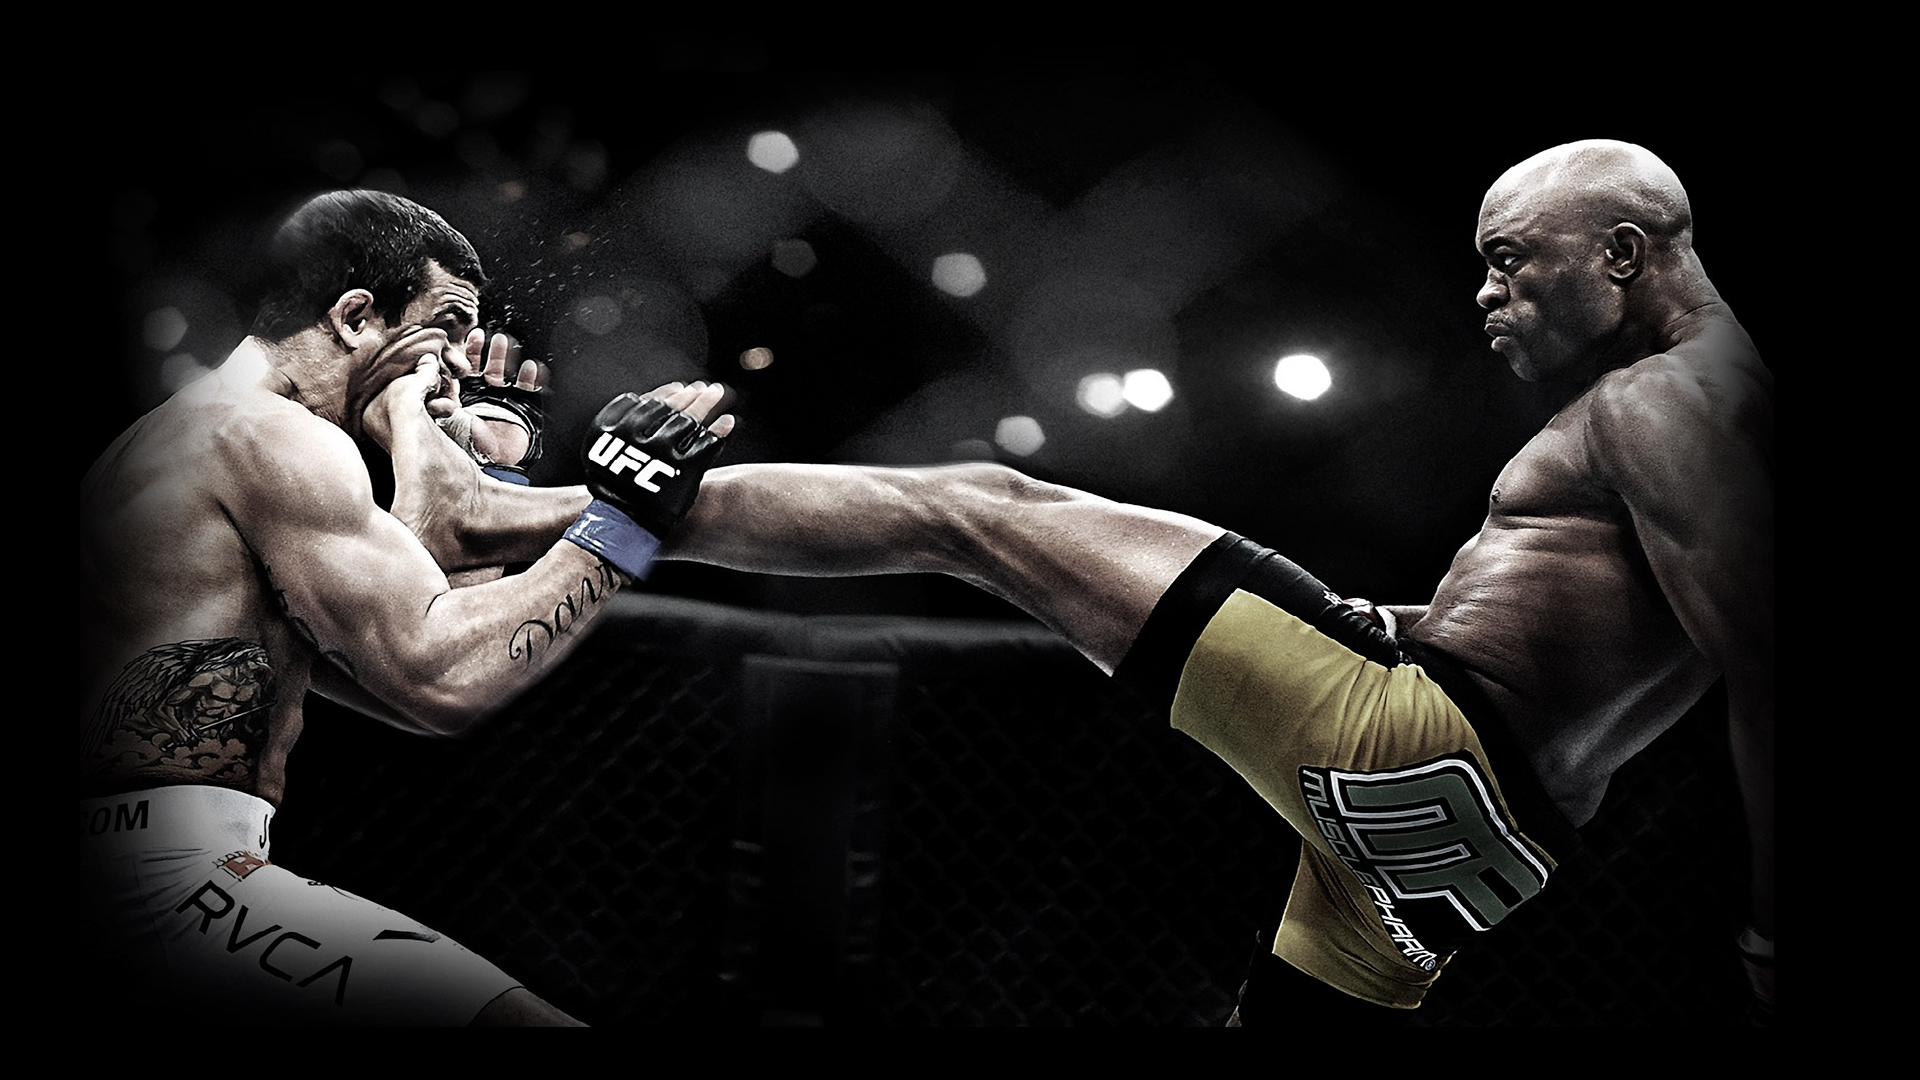 Mma Mixed Martial Fight Legs Boxing Men Males Muscle Fitness Wallpaper